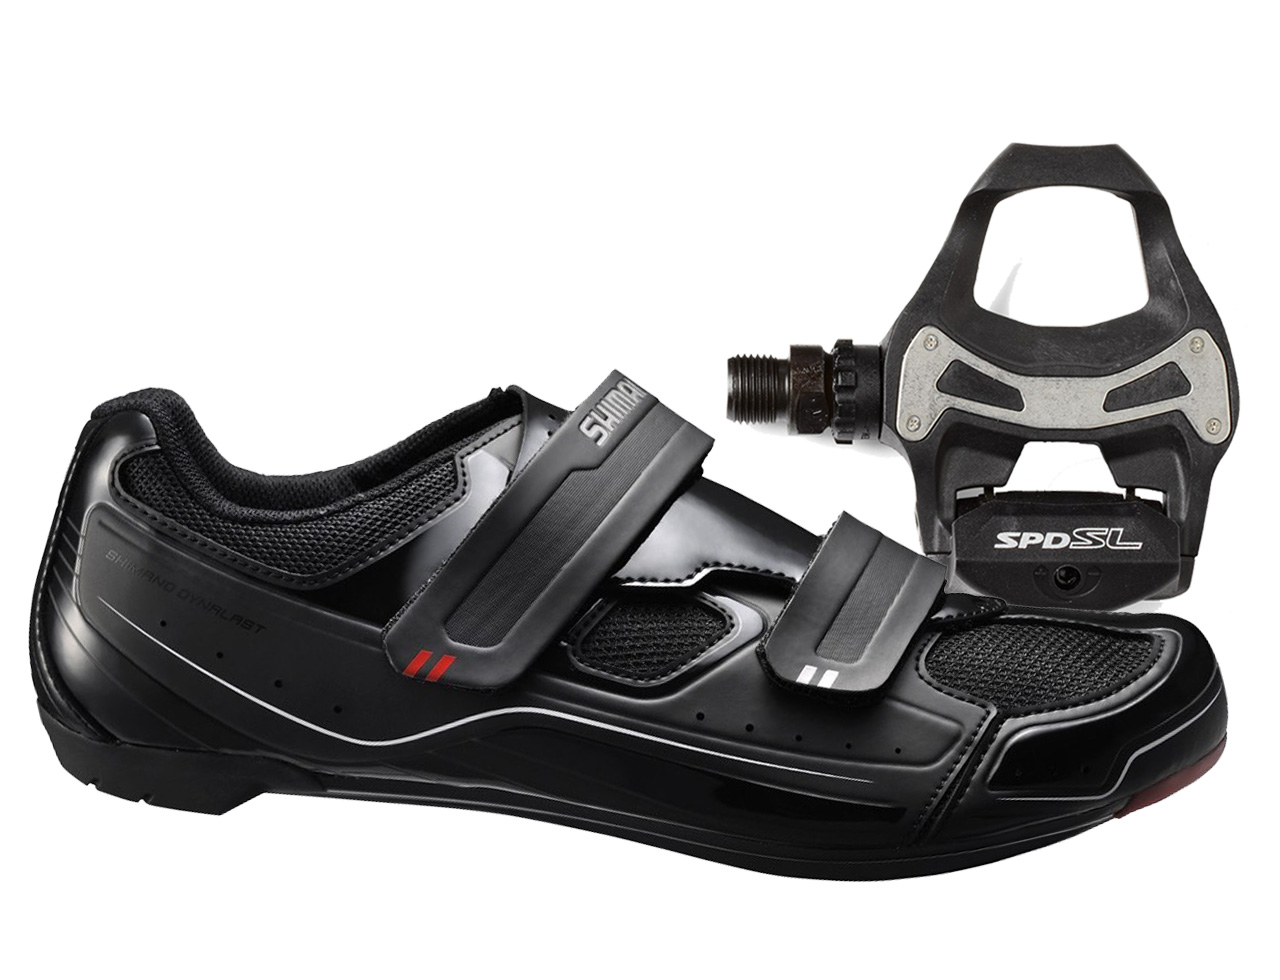 shimano shoes and pedals combo